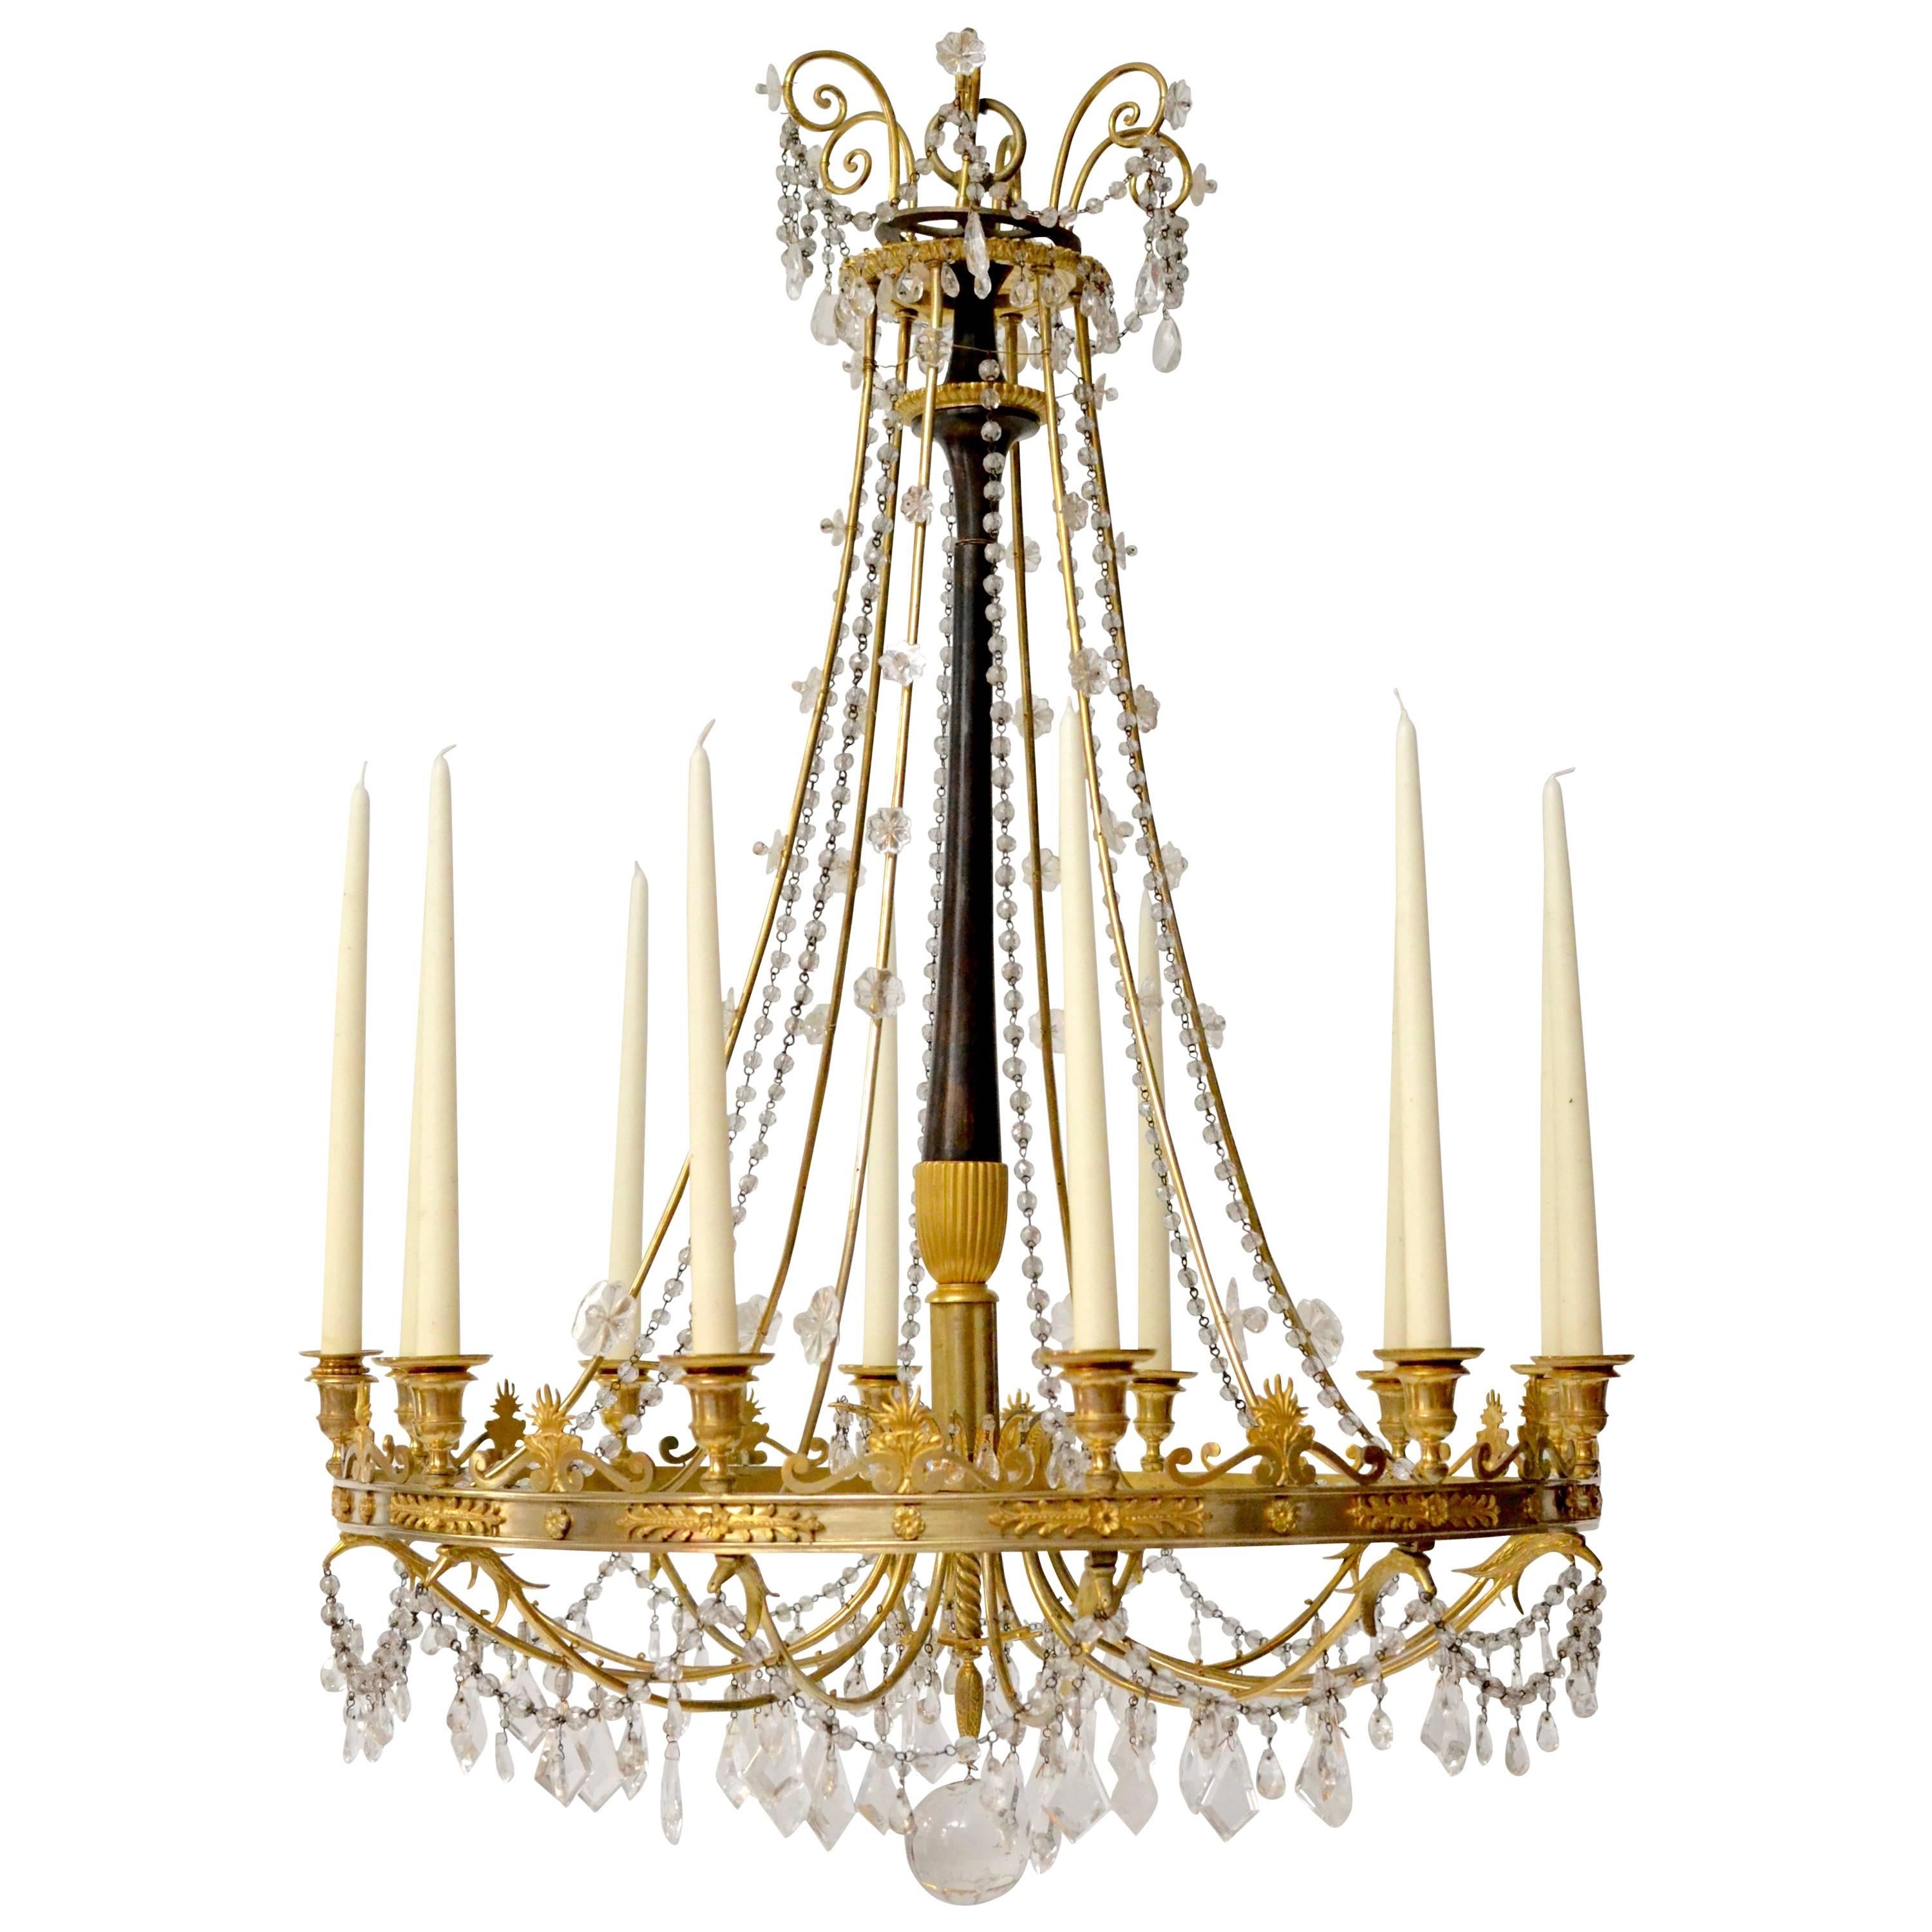 French Early 19th Century Gilt and Patinated Bronze Chandelier with Crystals